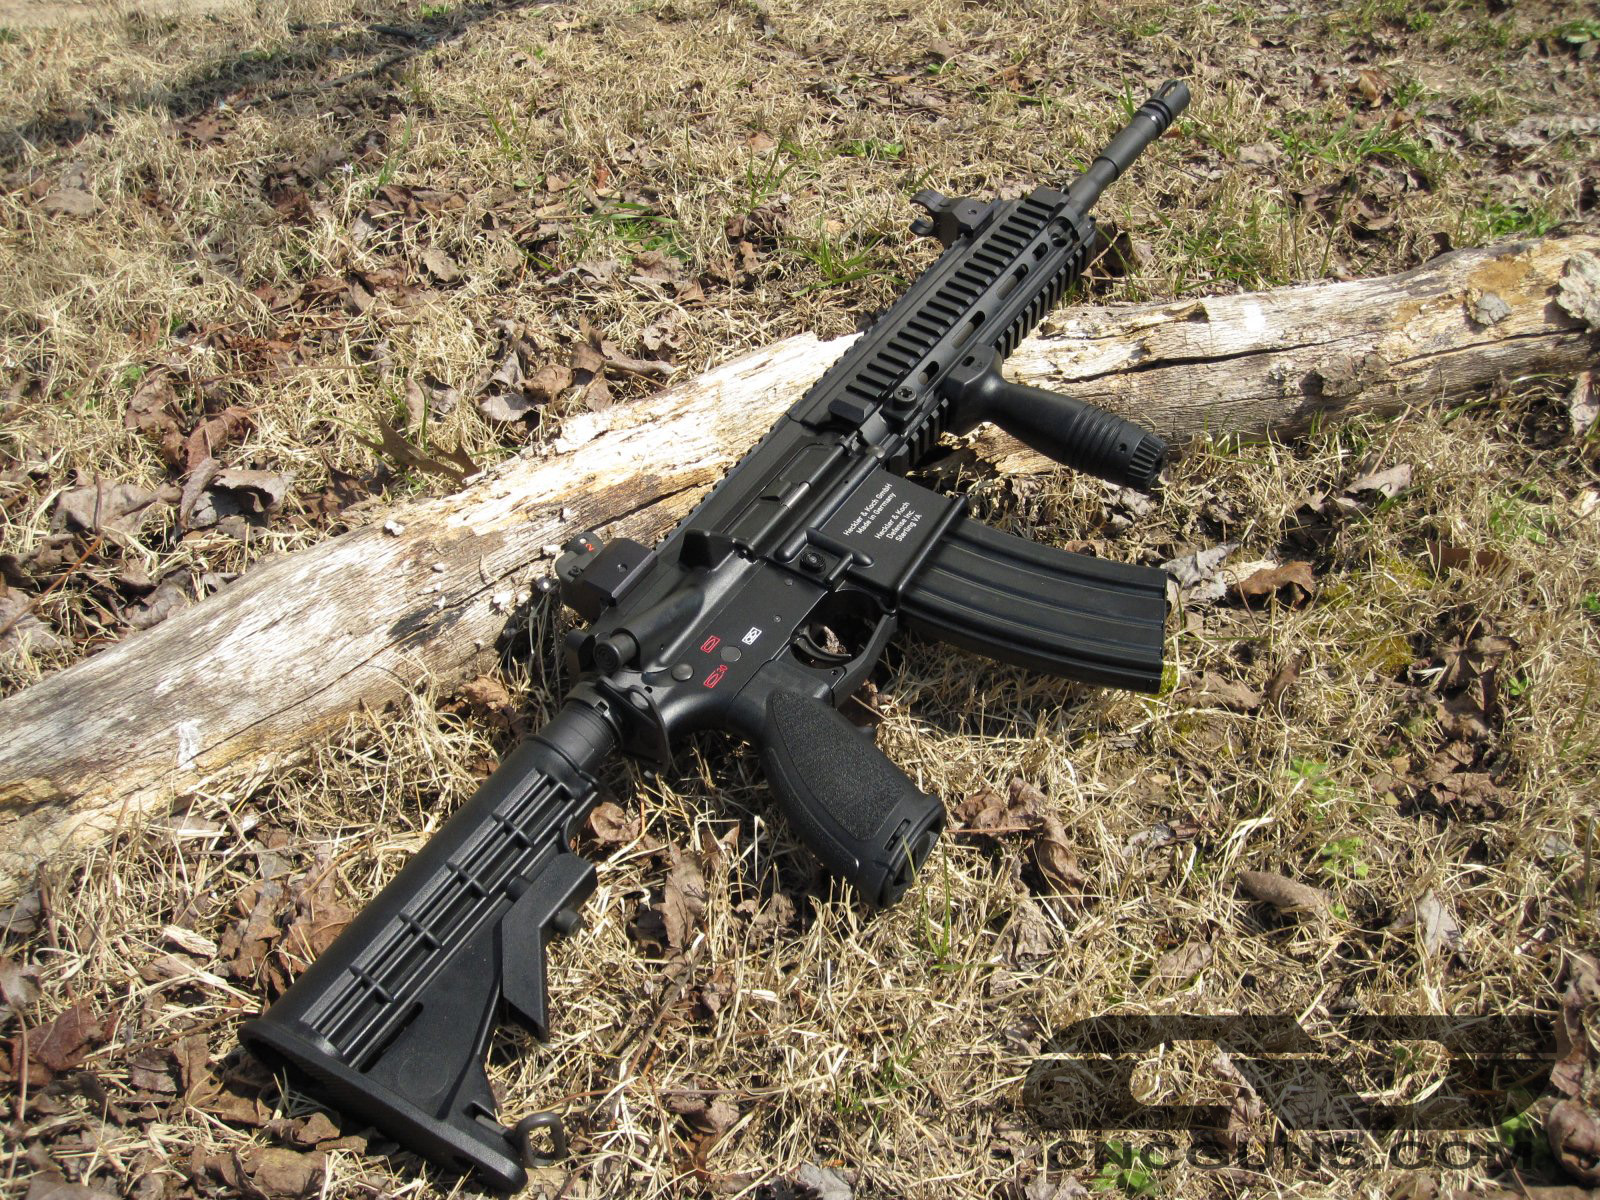 Below are pics of a batch of HK416 clones I made a while back. 